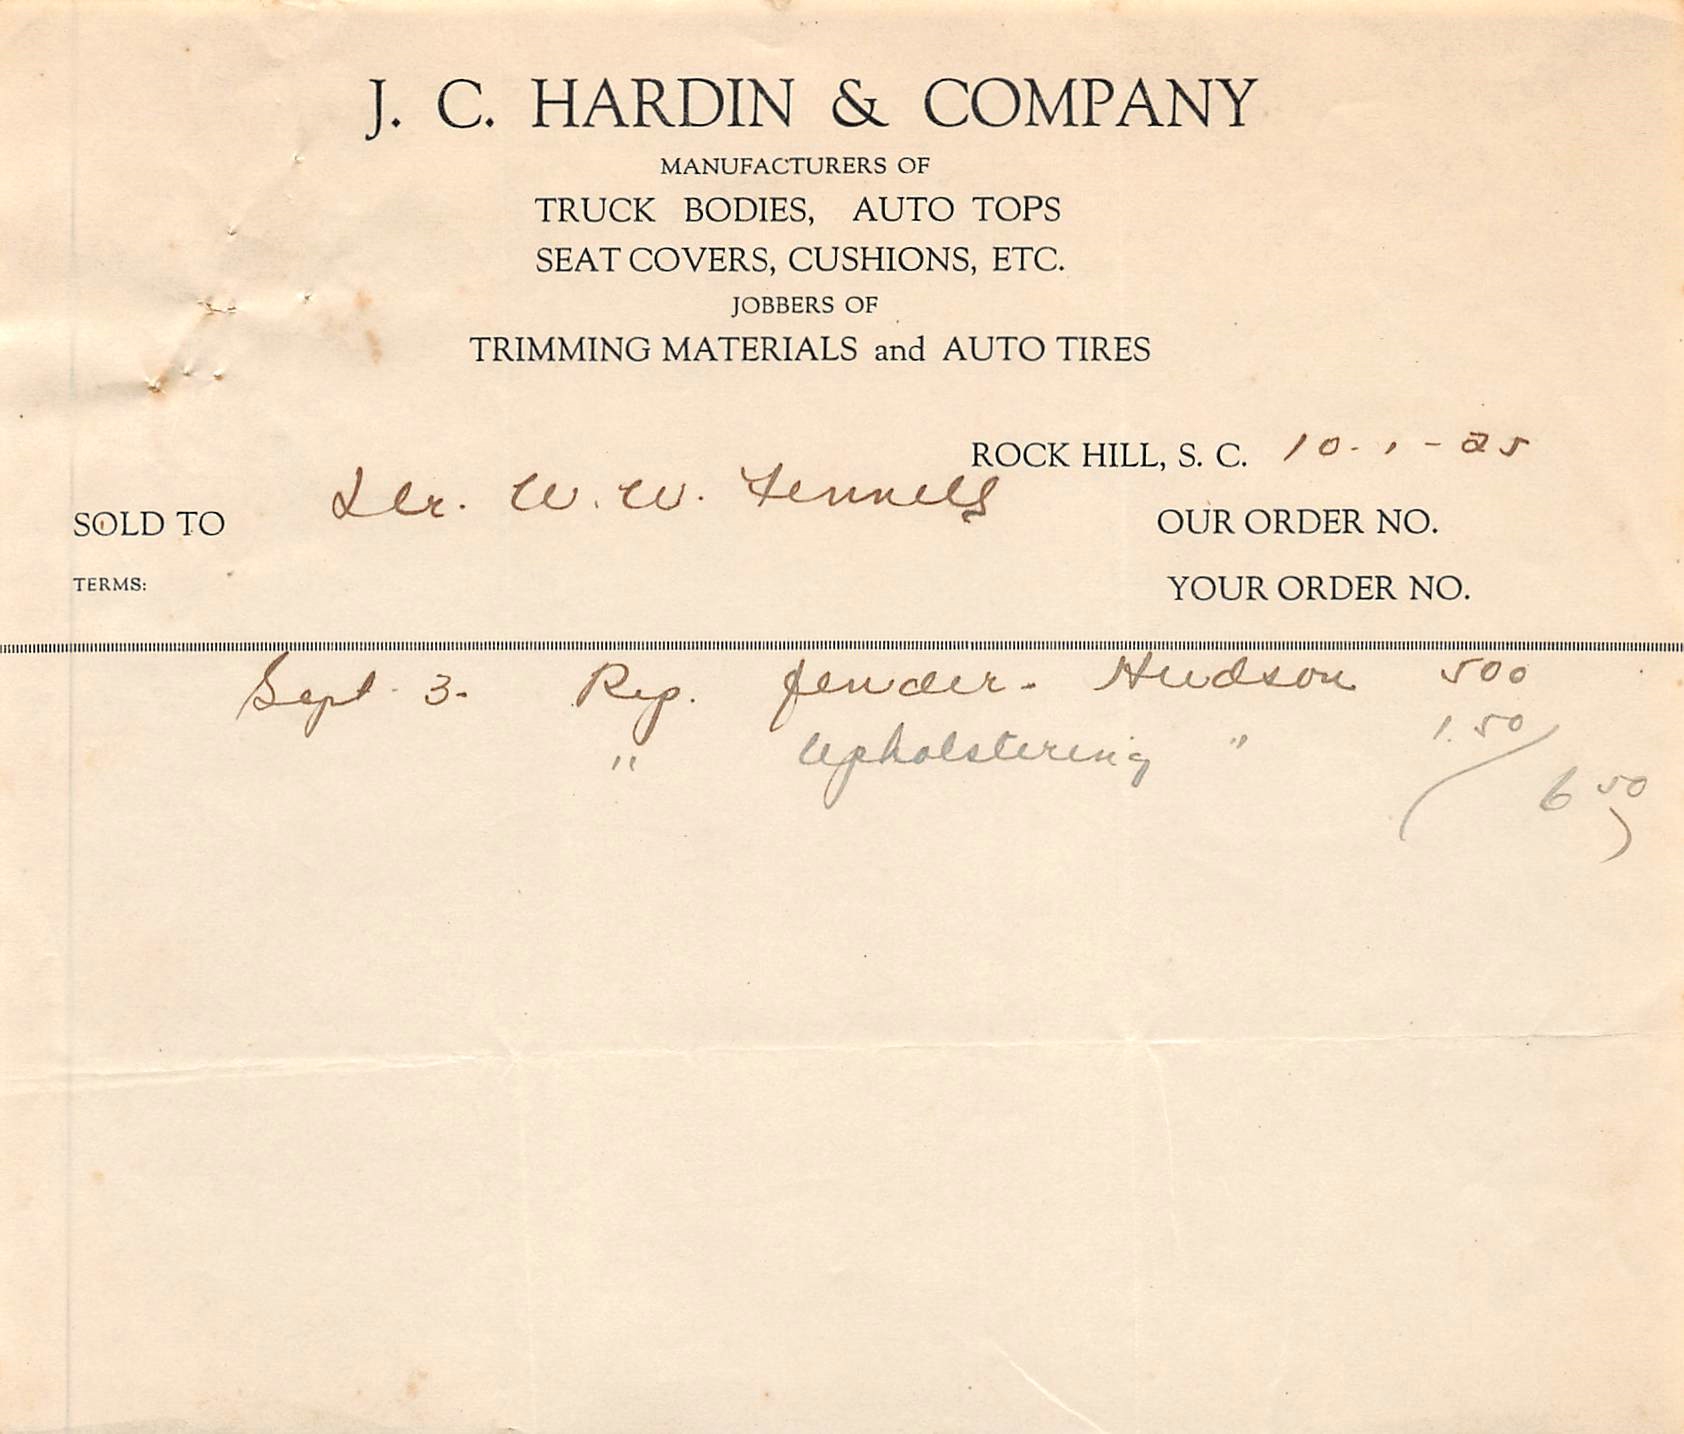 Dr. W.W. Fennell's Bill For Repairs - 1925